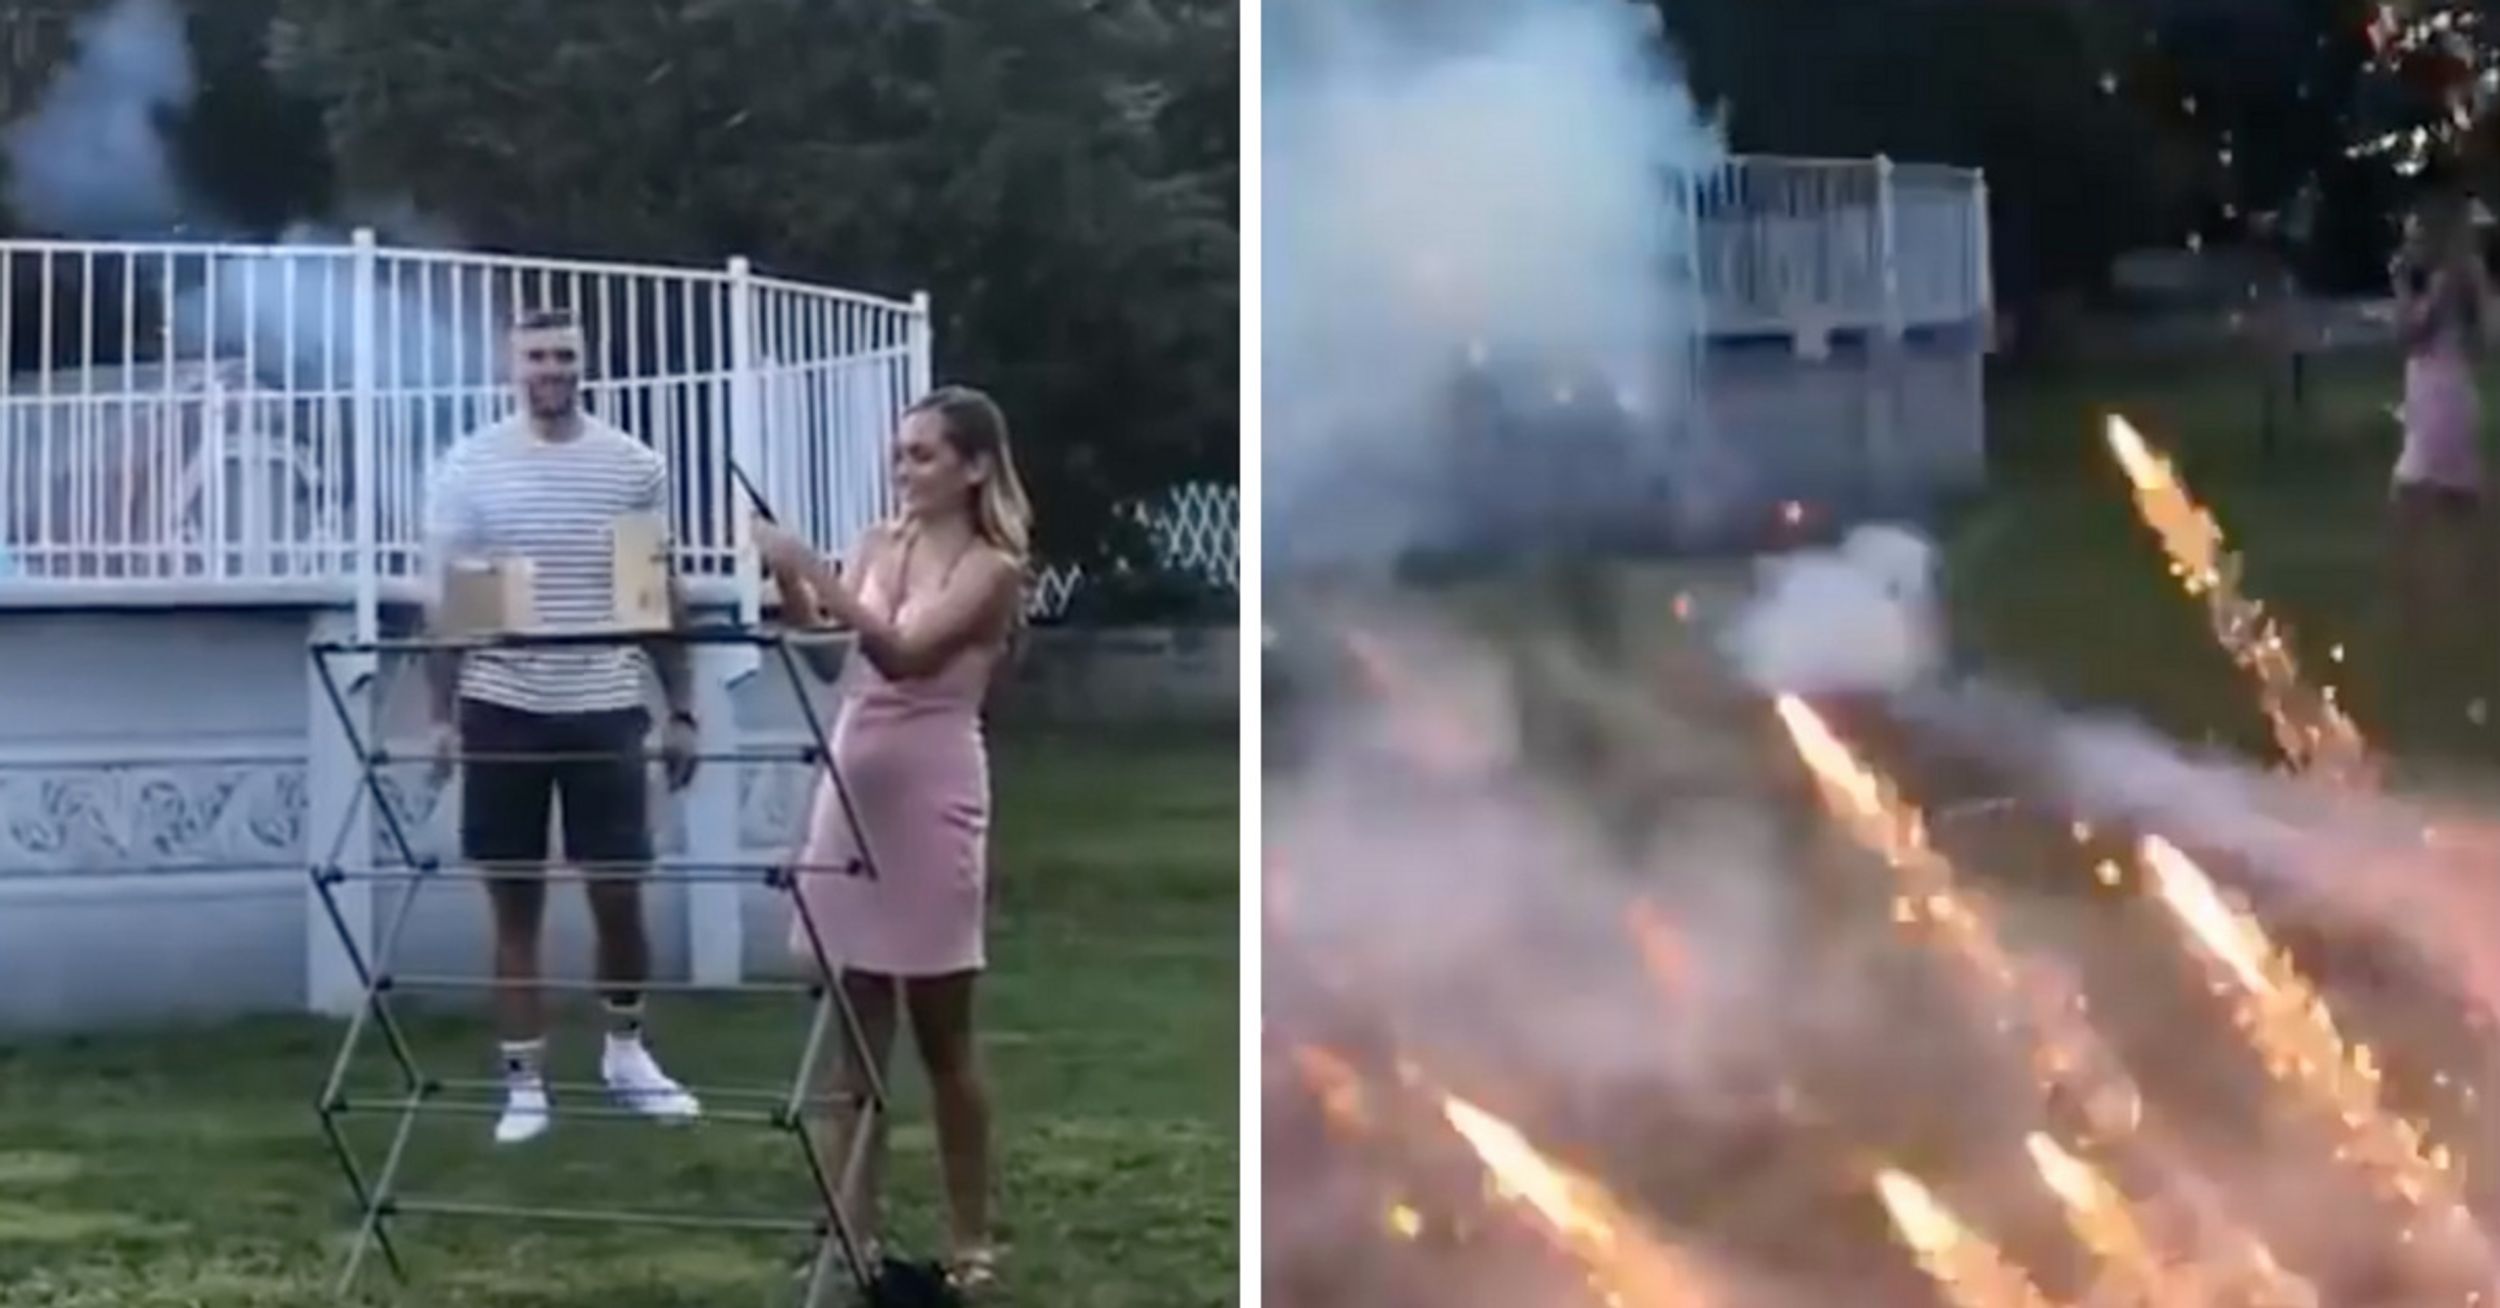 Couple's Fireworks Display For Gender Reveal Party Sends Guests Scrambling 😮